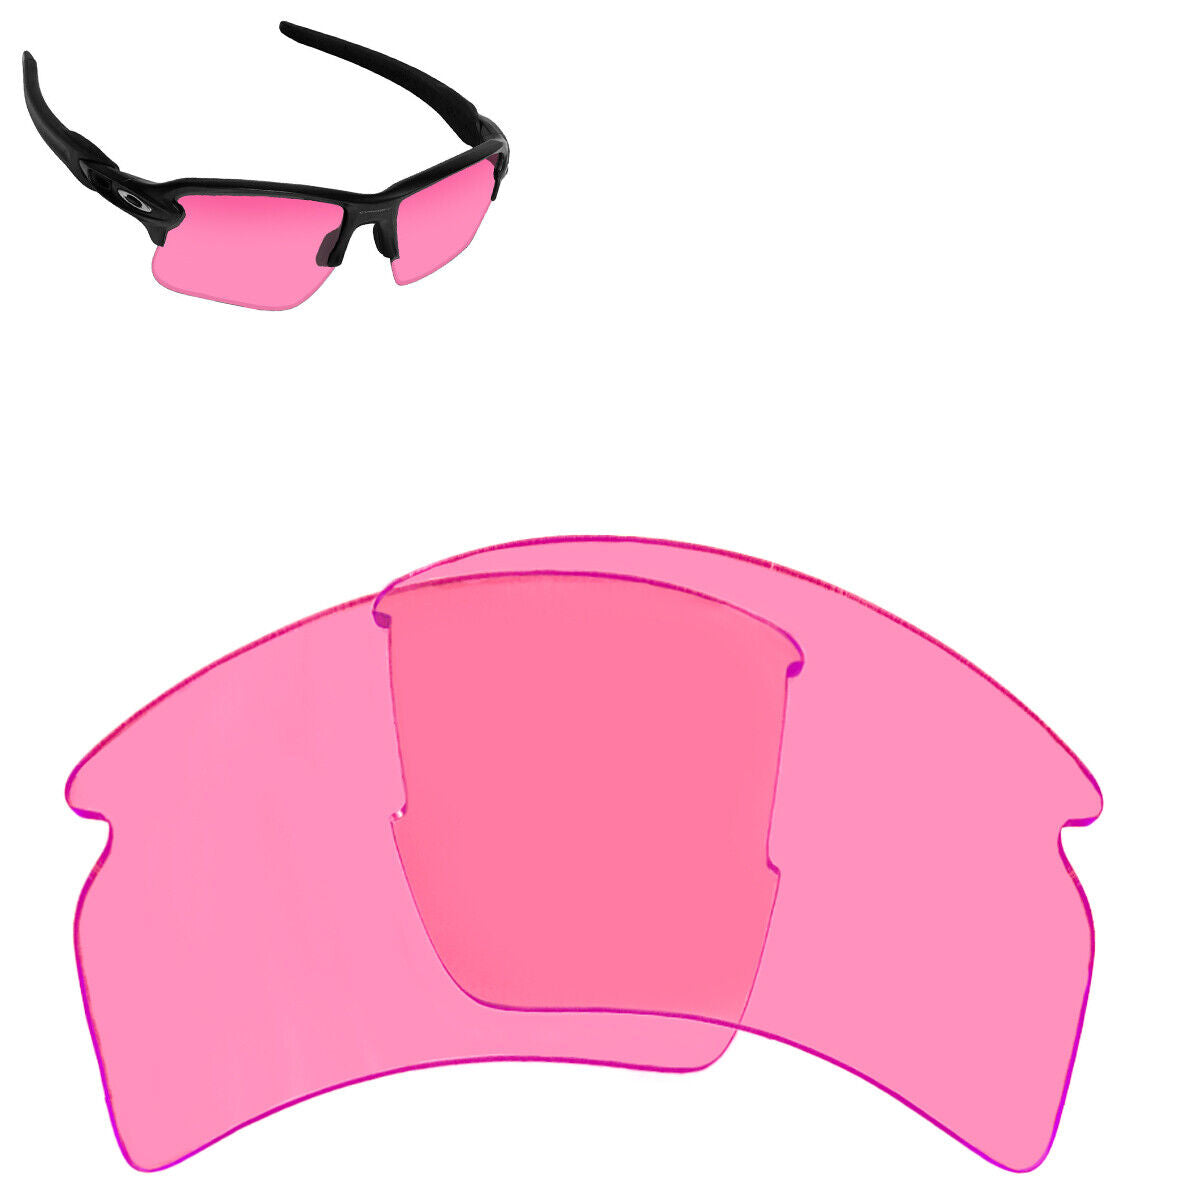 LenSwitch Polarized Replacement Lenses for Oakley Flak 2.0 XL Sunglasses Pink